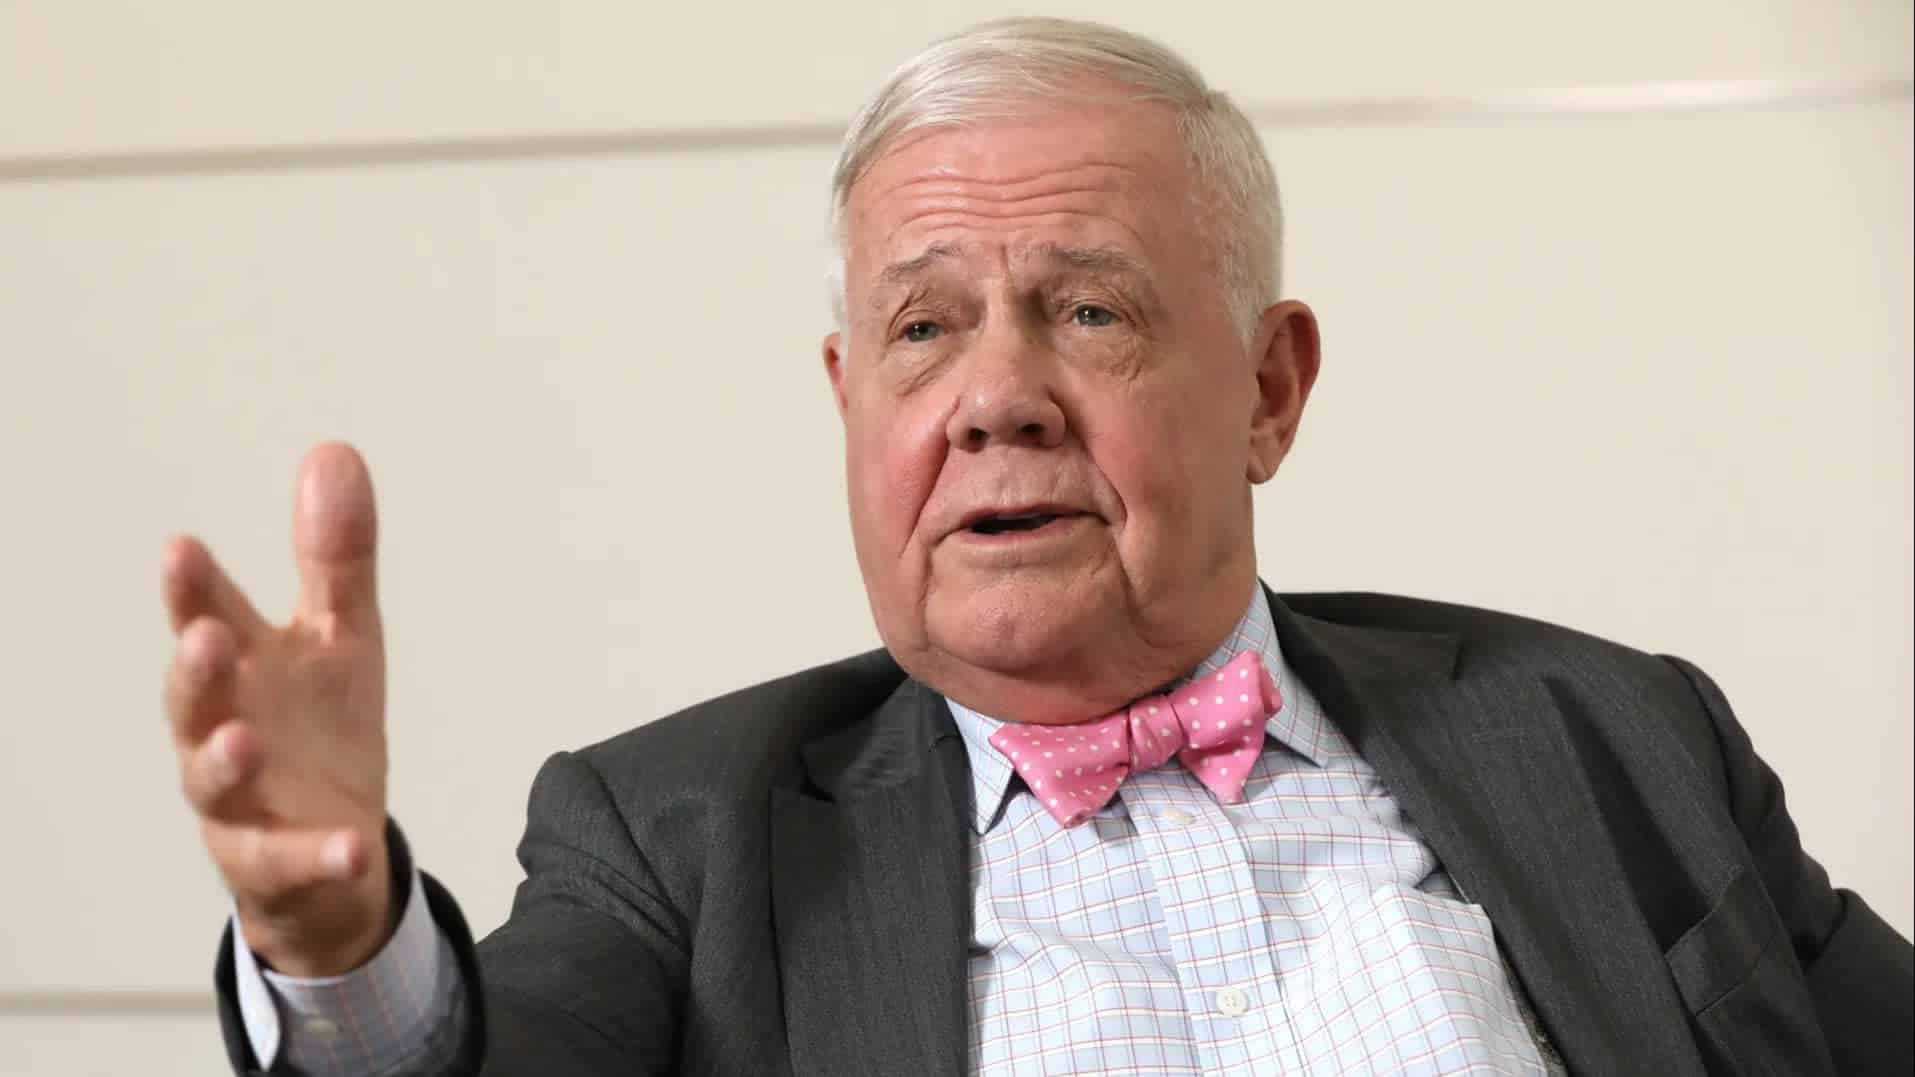 Jim-rogers:-bitcoin-is-going-to-zero-because-it’s-not-based-on-armed-force